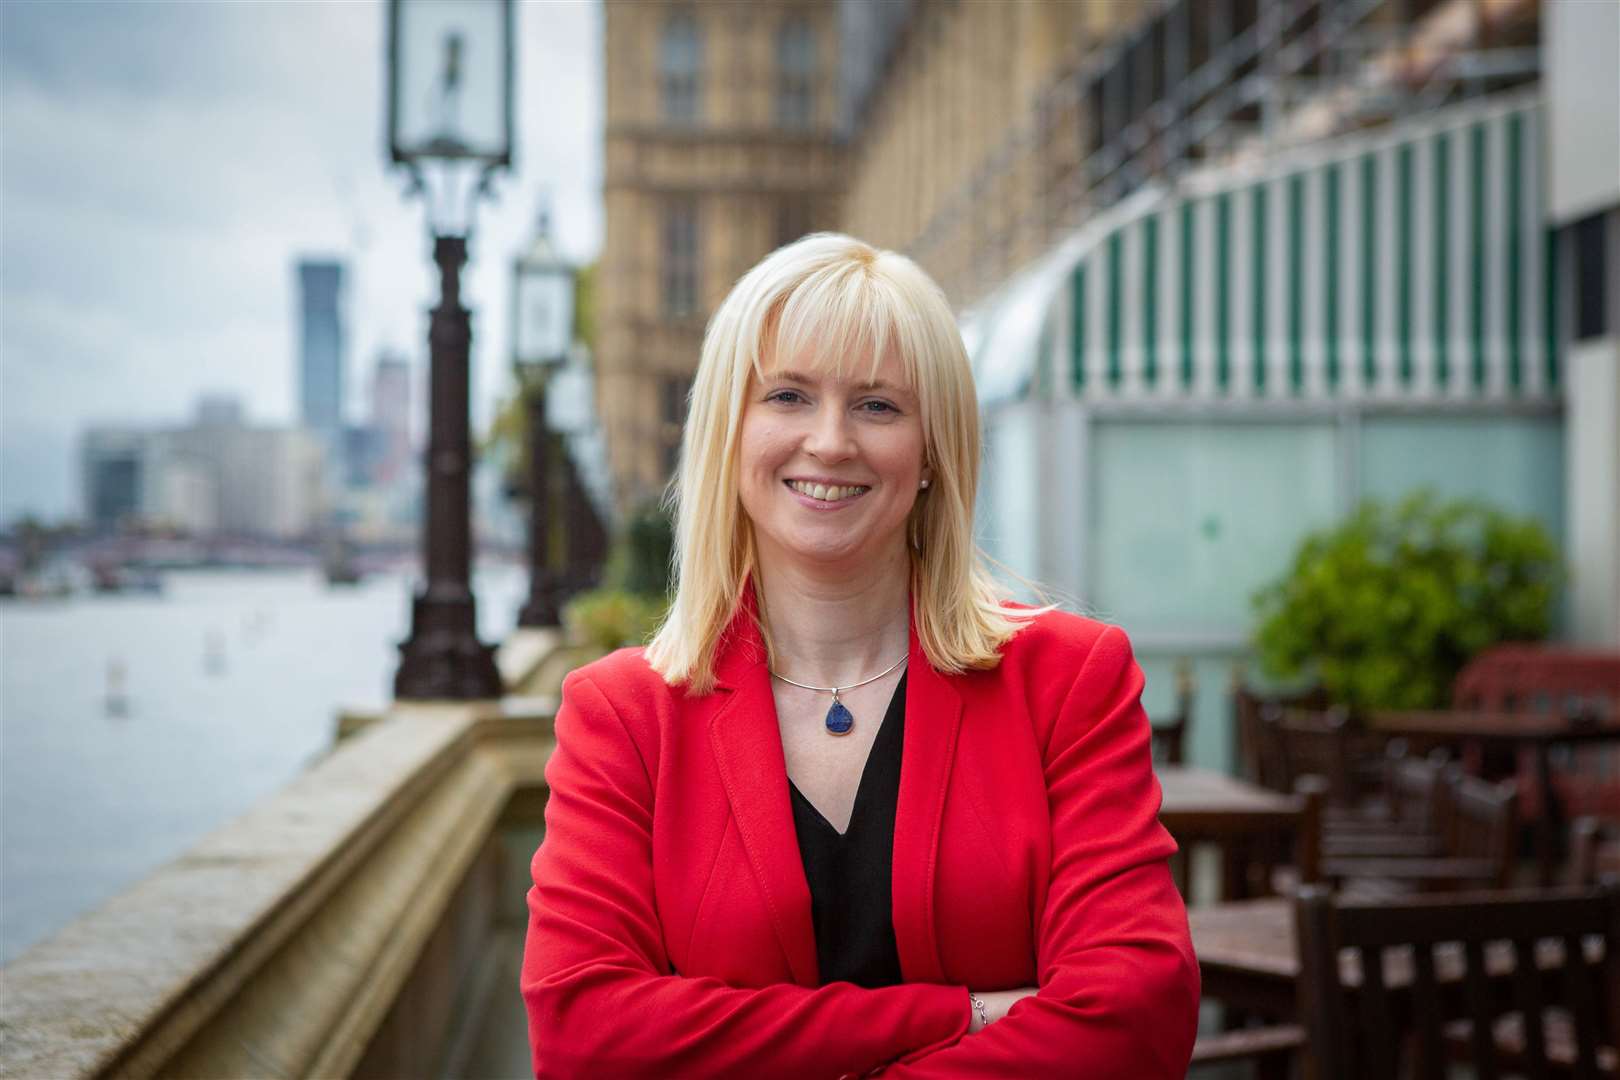 Canterbury Labour candidate Rosie Duffield has described her party as "probably" institutionally anti-Semitic